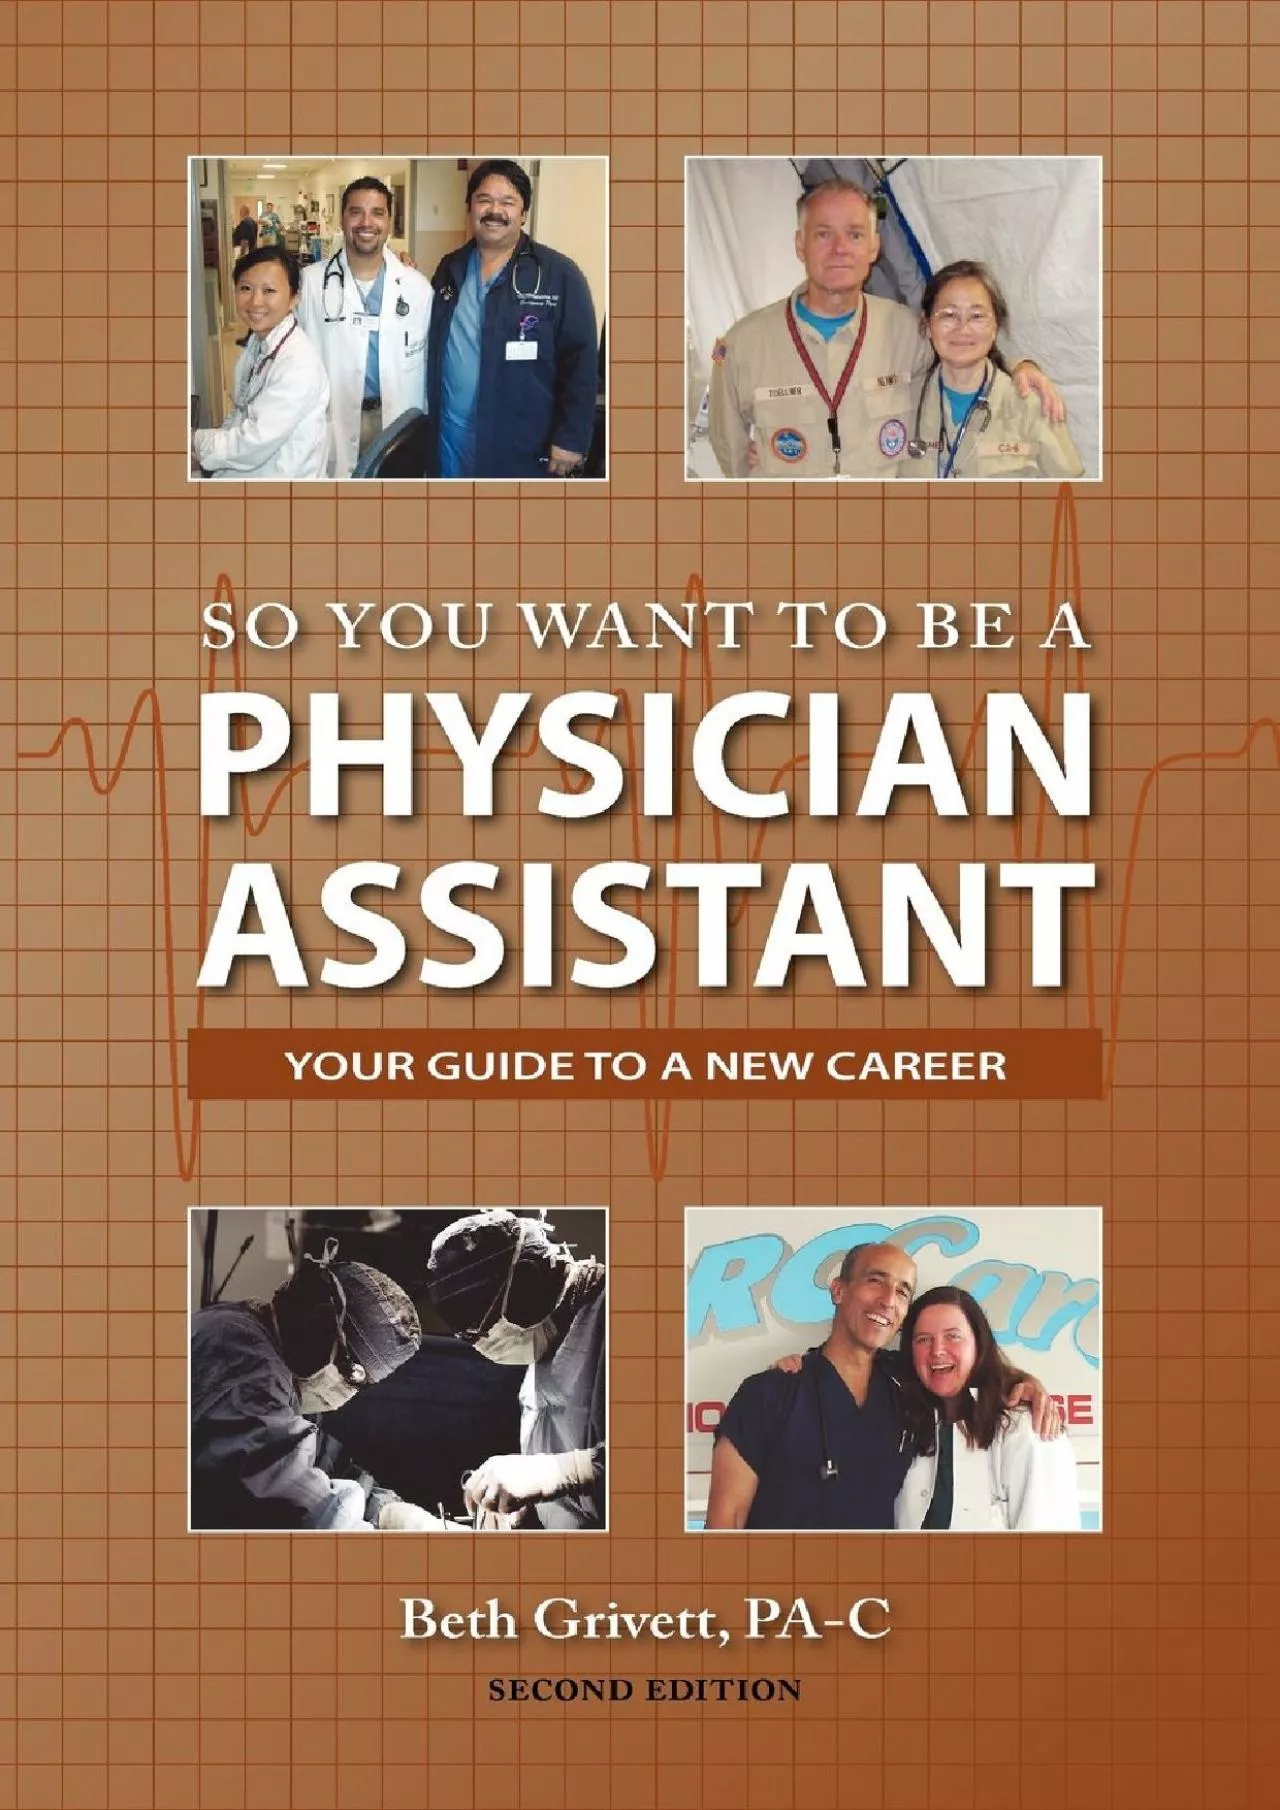 (DOWNLOAD)-So You Want to Be a Physician Assistant - Second Edition